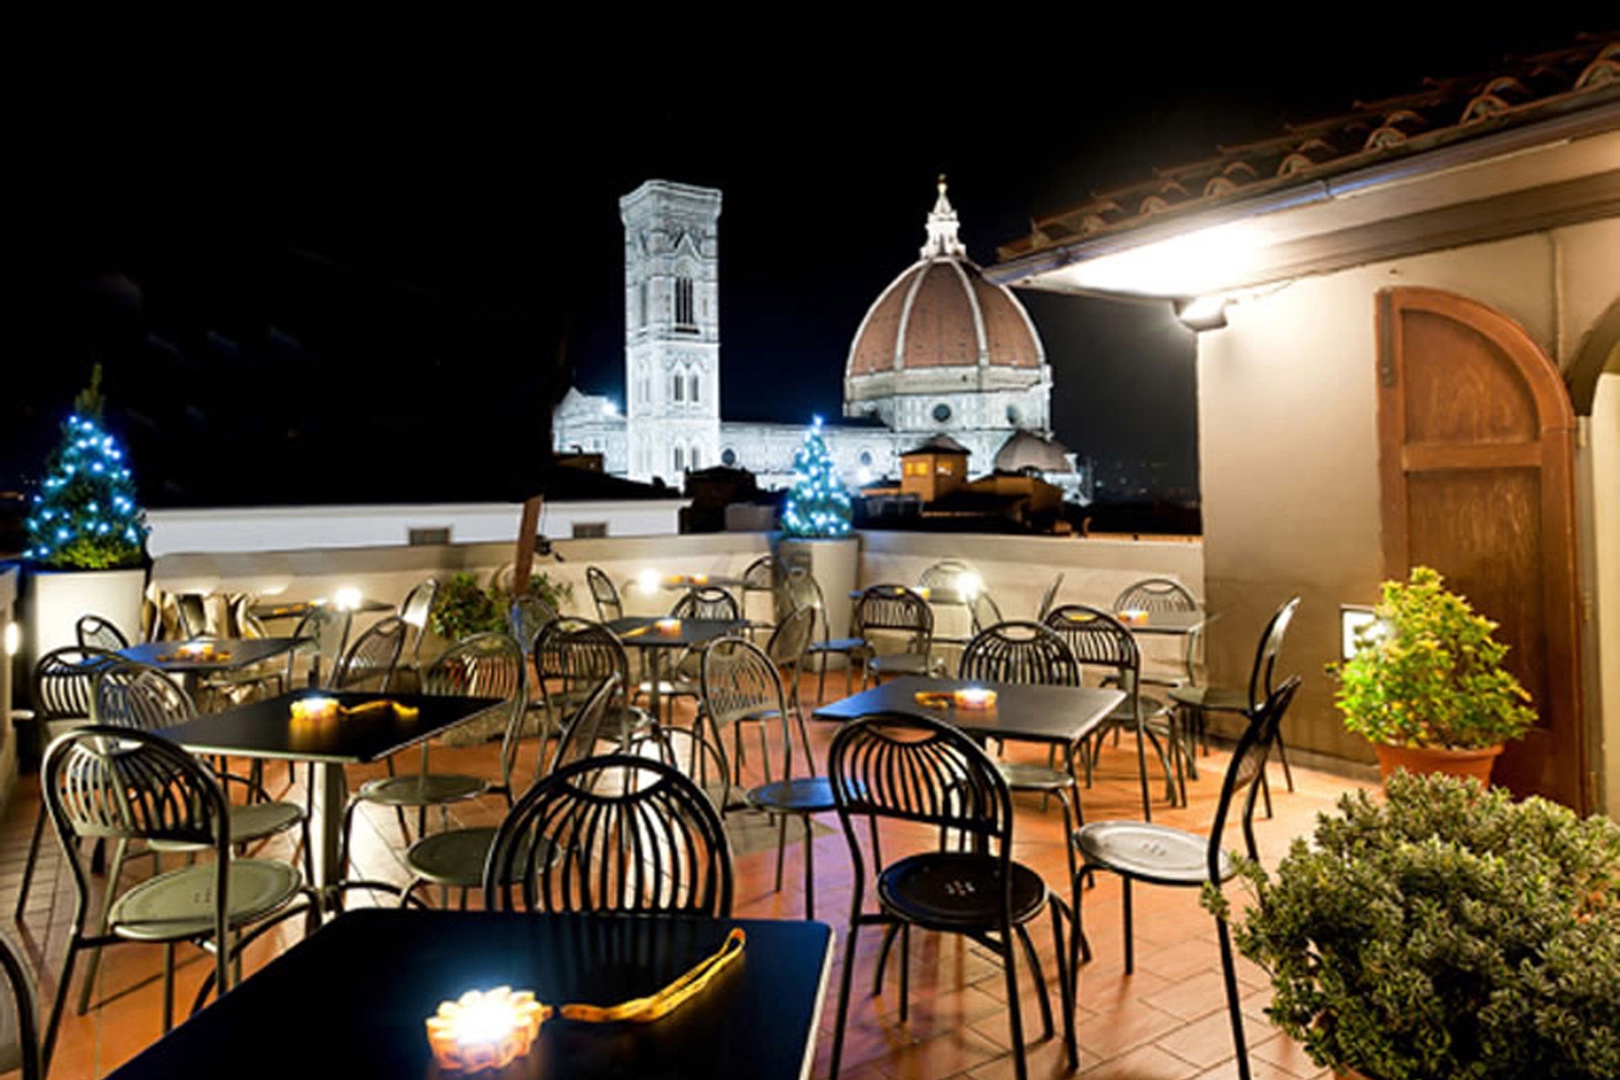 Savor the view from the rooftop cafe of Rinascente department store.